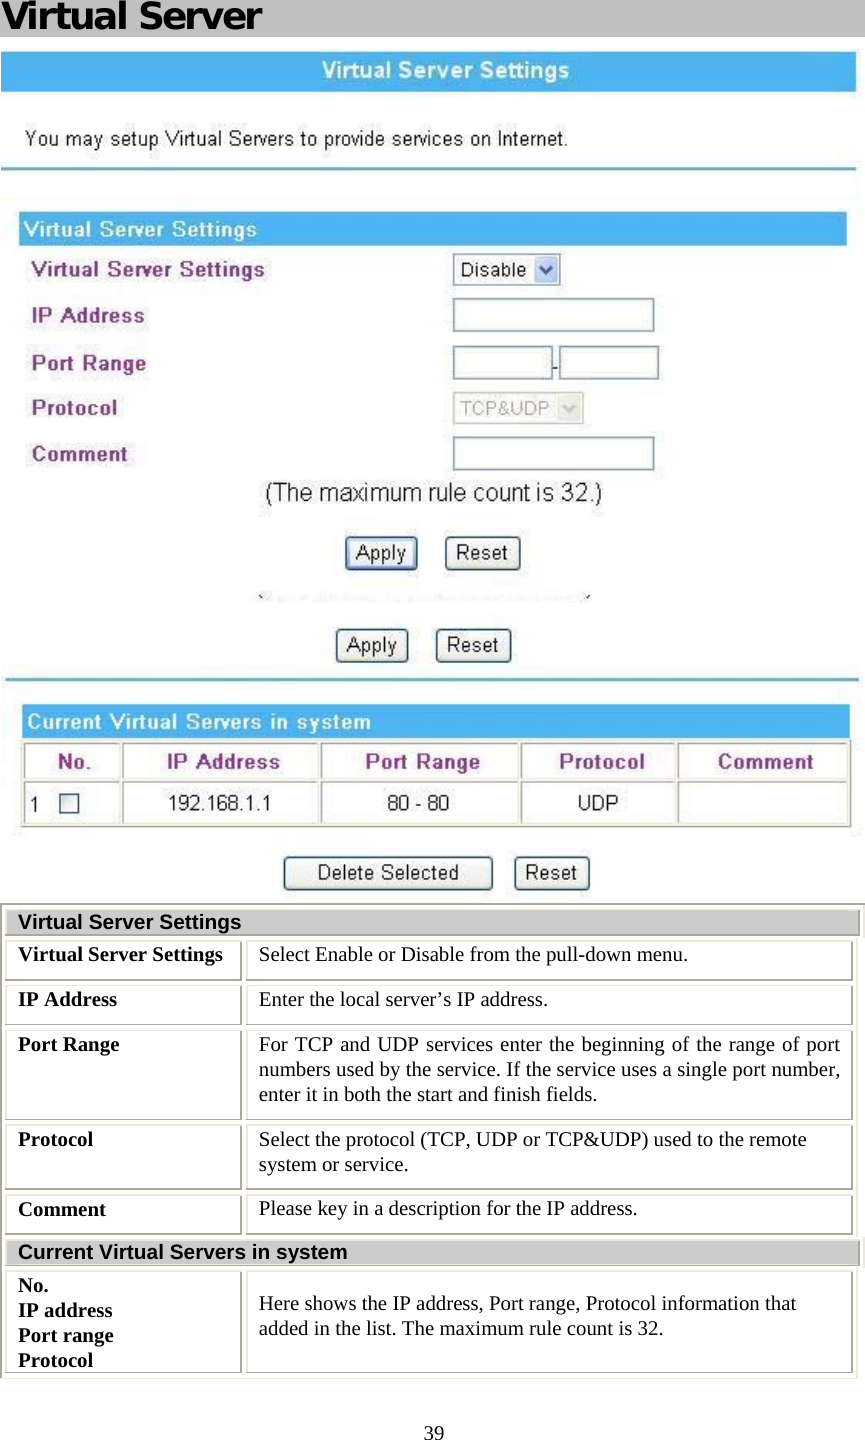   39  Virtual Server  Virtual Server Settings Virtual Server Settings  Select Enable or Disable from the pull-down menu. IP Address  Enter the local server’s IP address. Port Range  For TCP and UDP services enter the beginning of the range of port numbers used by the service. If the service uses a single port number, enter it in both the start and finish fields. Protocol  Select the protocol (TCP, UDP or TCP&amp;UDP) used to the remote system or service. Comment  Please key in a description for the IP address. Current Virtual Servers in system No.  IP address Port range Protocol Here shows the IP address, Port range, Protocol information that added in the list. The maximum rule count is 32. 